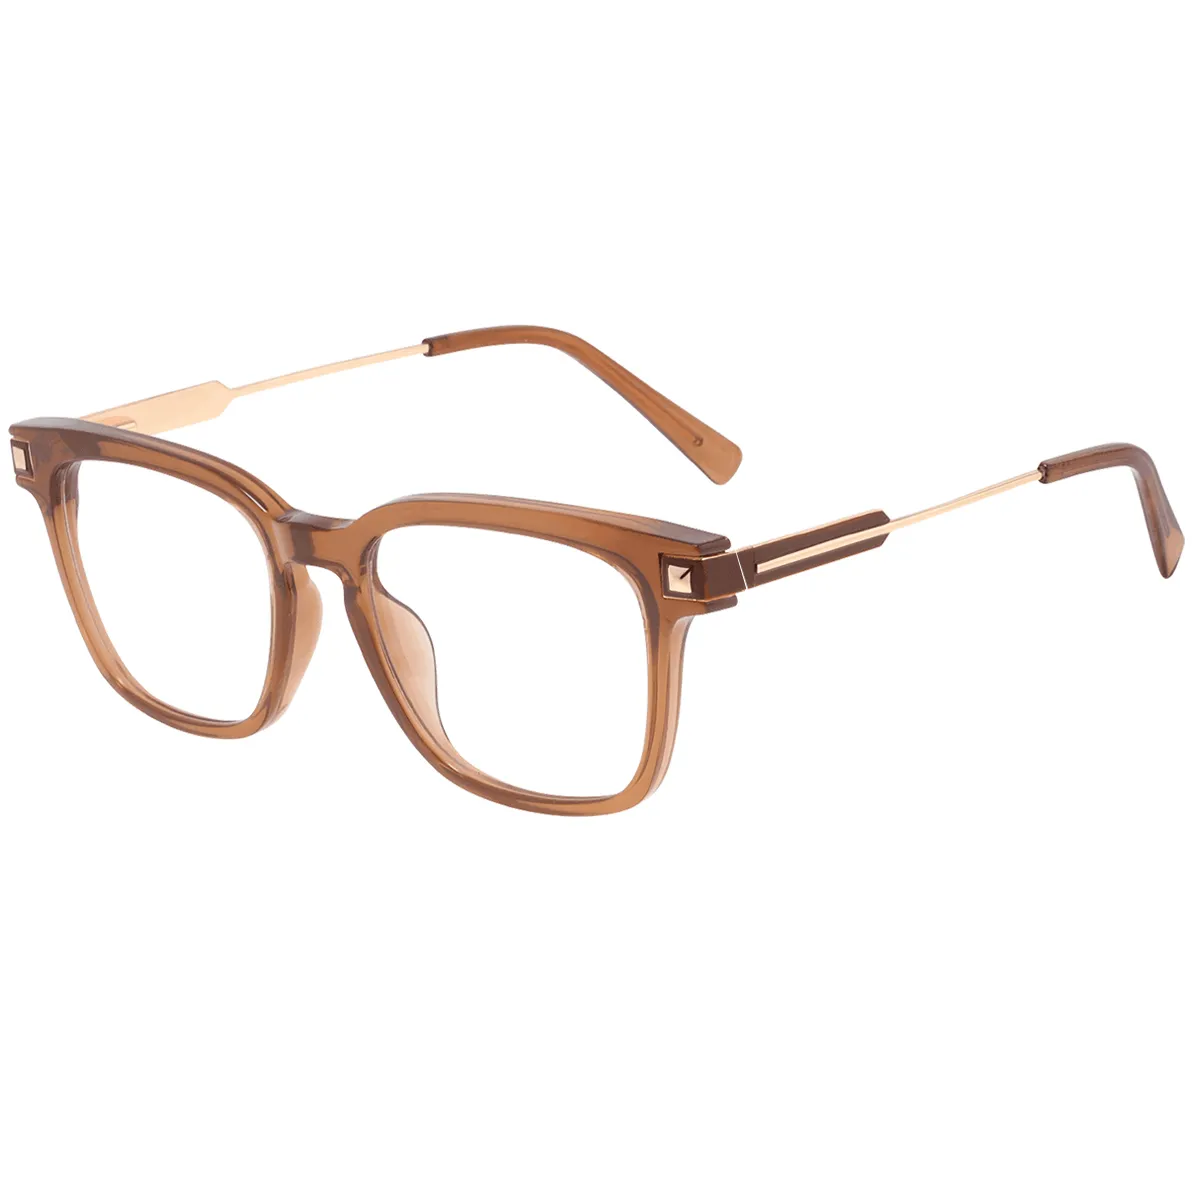 Keith - Square Brown Glasses for Men